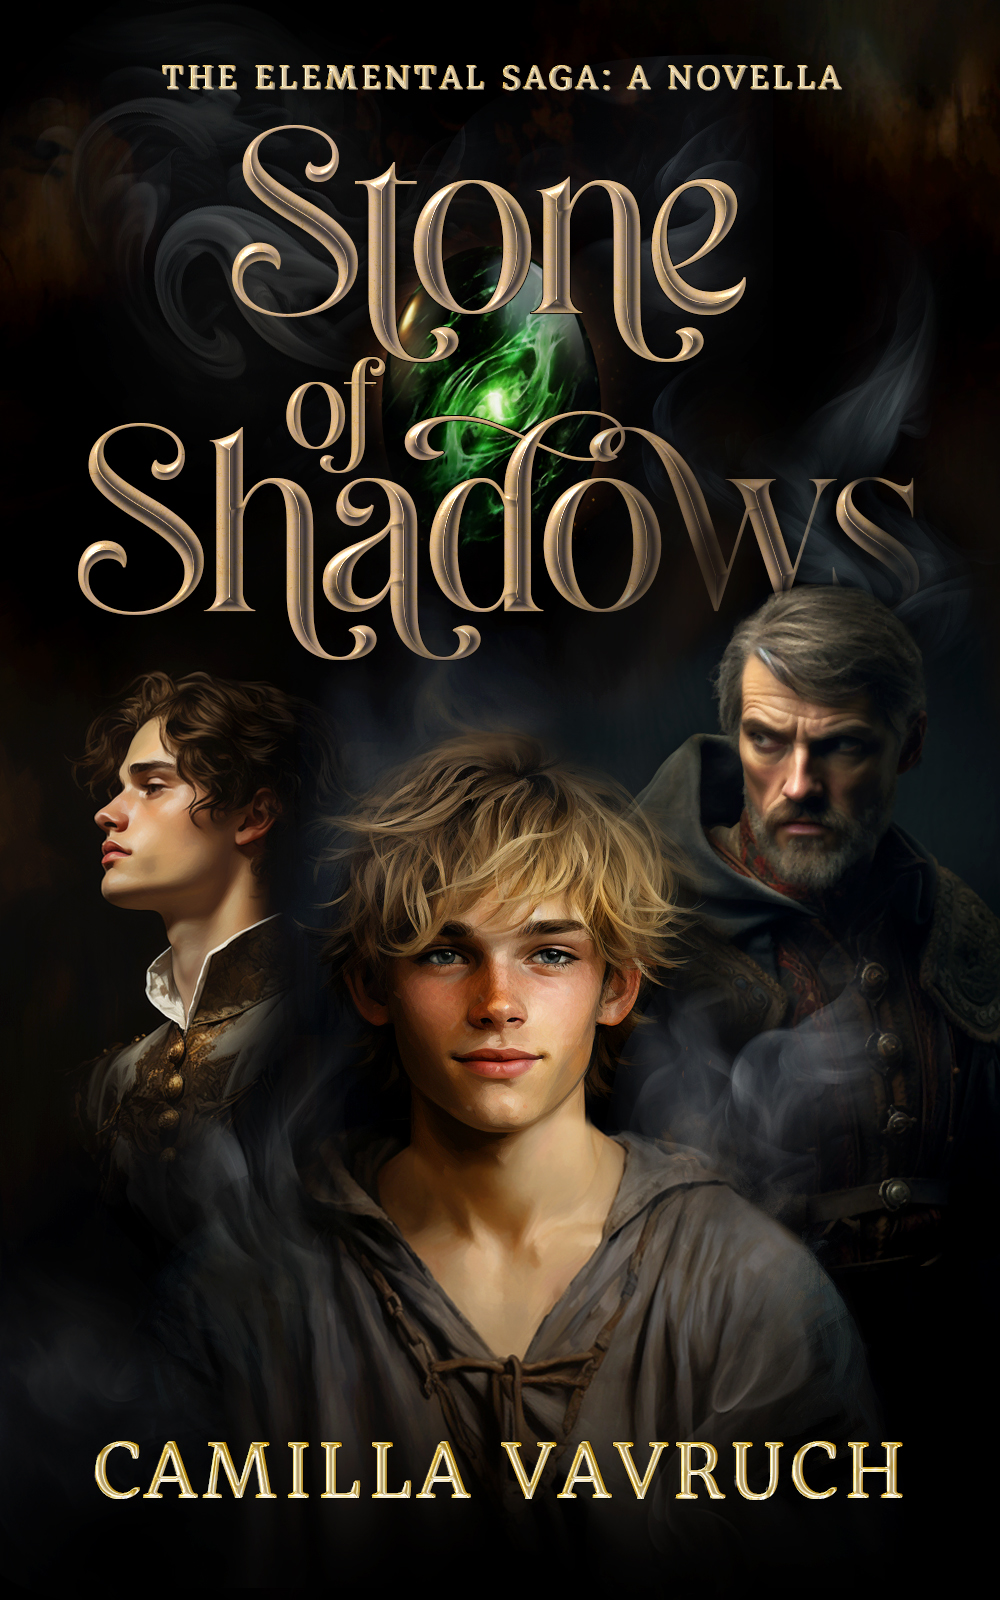 Cover of Stone of Shadows by Camilla Vavruch